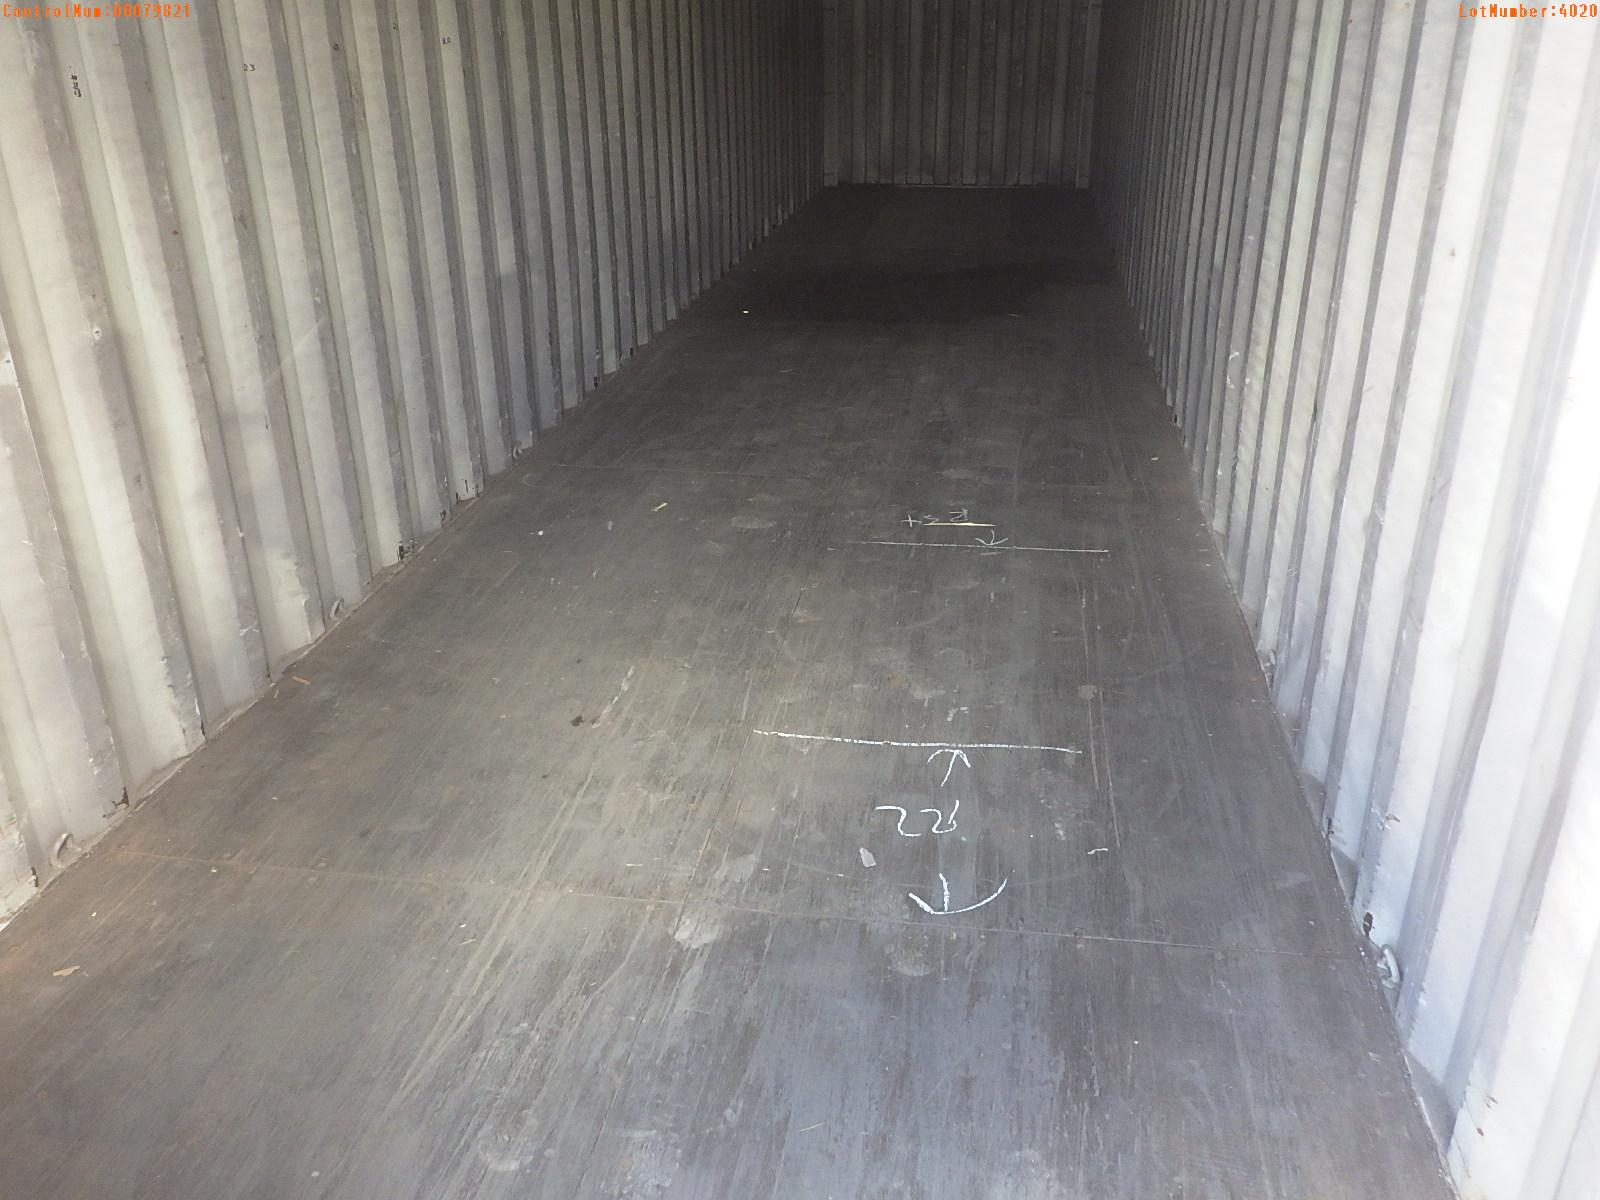 5-04020 (Equip.-Container)  Seller:Private/Dealer TRITON 40 FOOT METAL SHIPPING